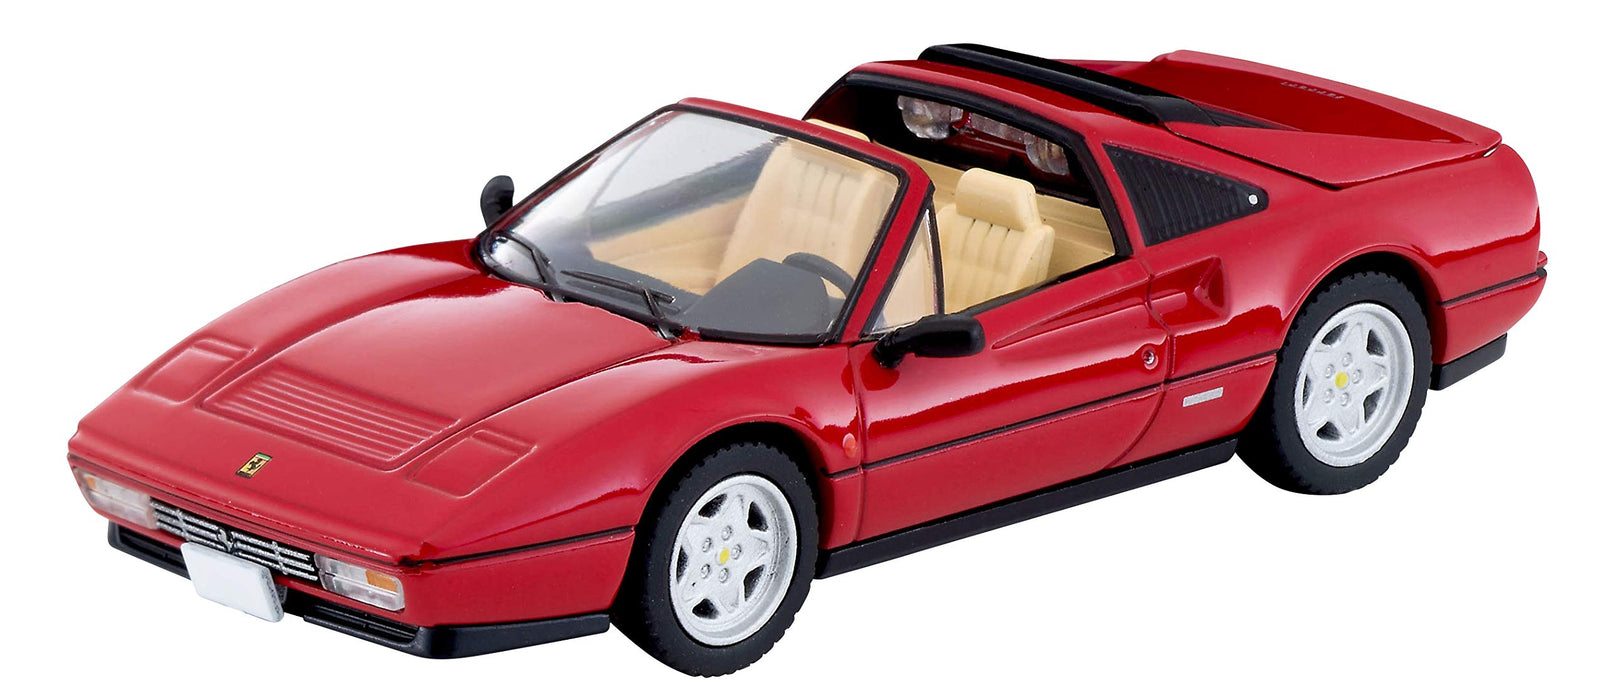 Tomytec Tomica Limited Vintage Neo Ferrari 328 GTS Red 1/64 Scale Model